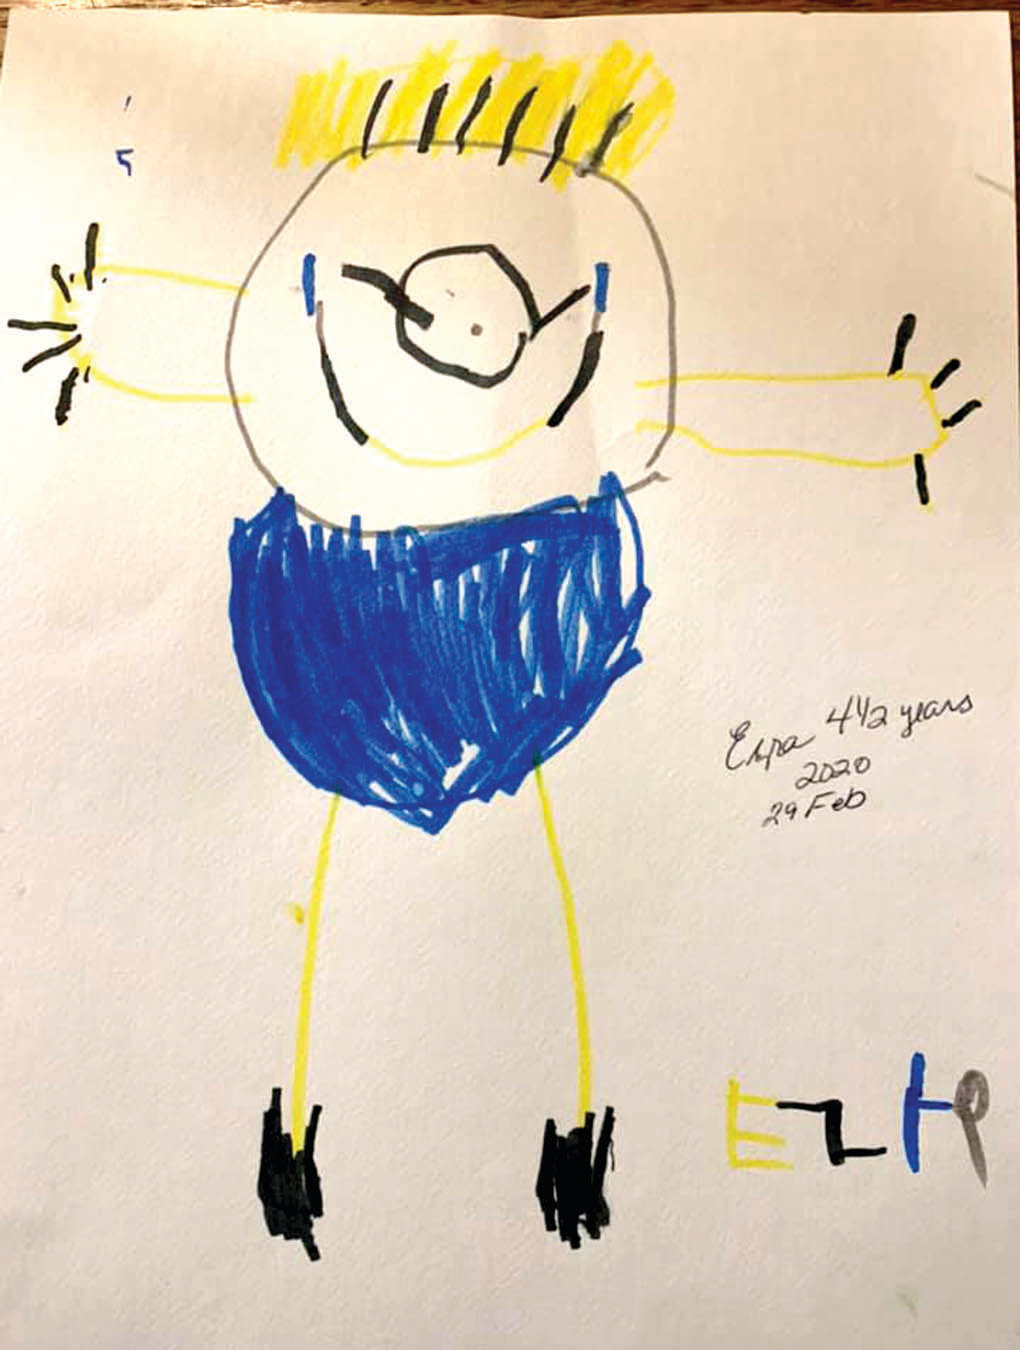 Cheryl Probst took a picture of this drawing by her grandson, Ezra.